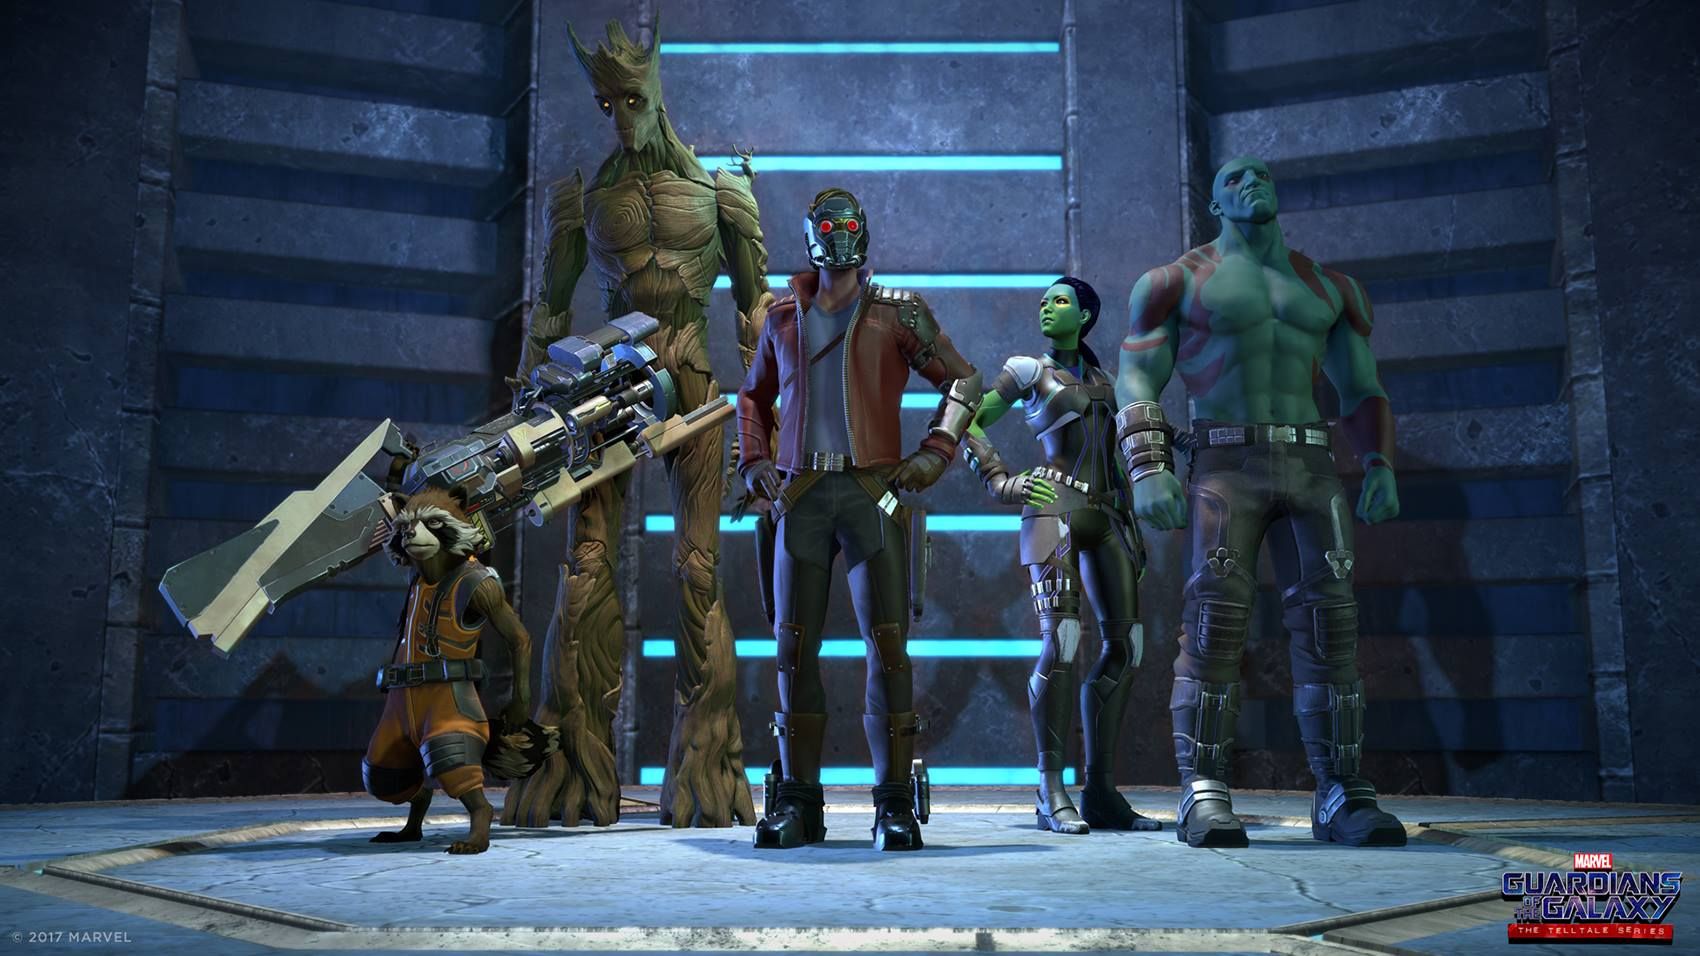 telltale-s-guardians-of-the-galaxy-game-will-premiere-this-spring-first-official-photos